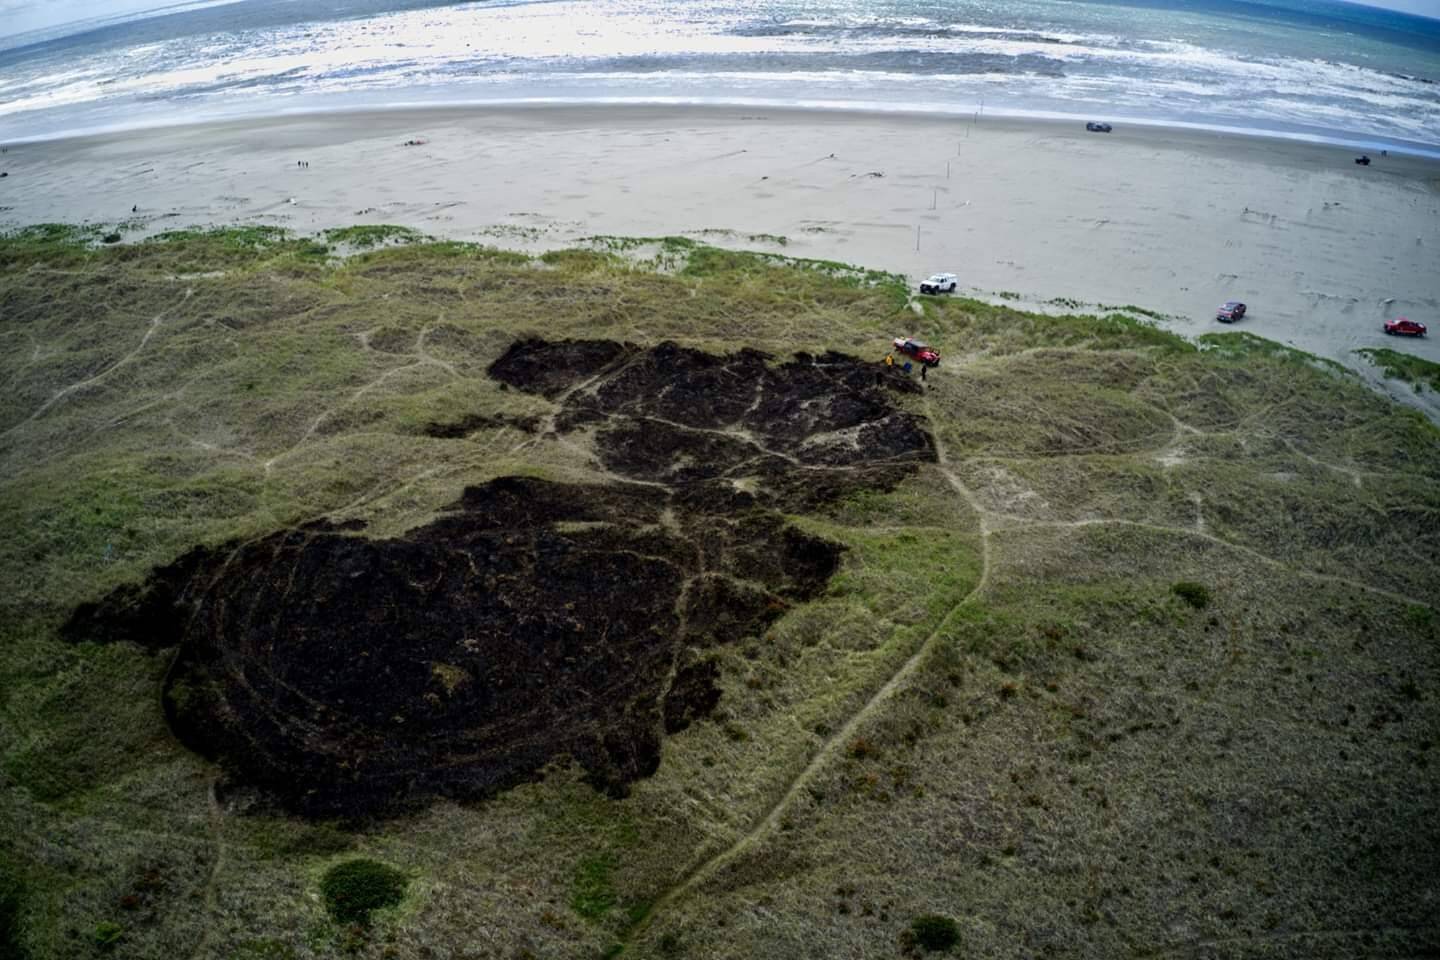 Flammable vegetation in the Pacific Dunes poses a threat to nearby residential properties and hotels. Photo courtesy of Ocean Shores Fire Department